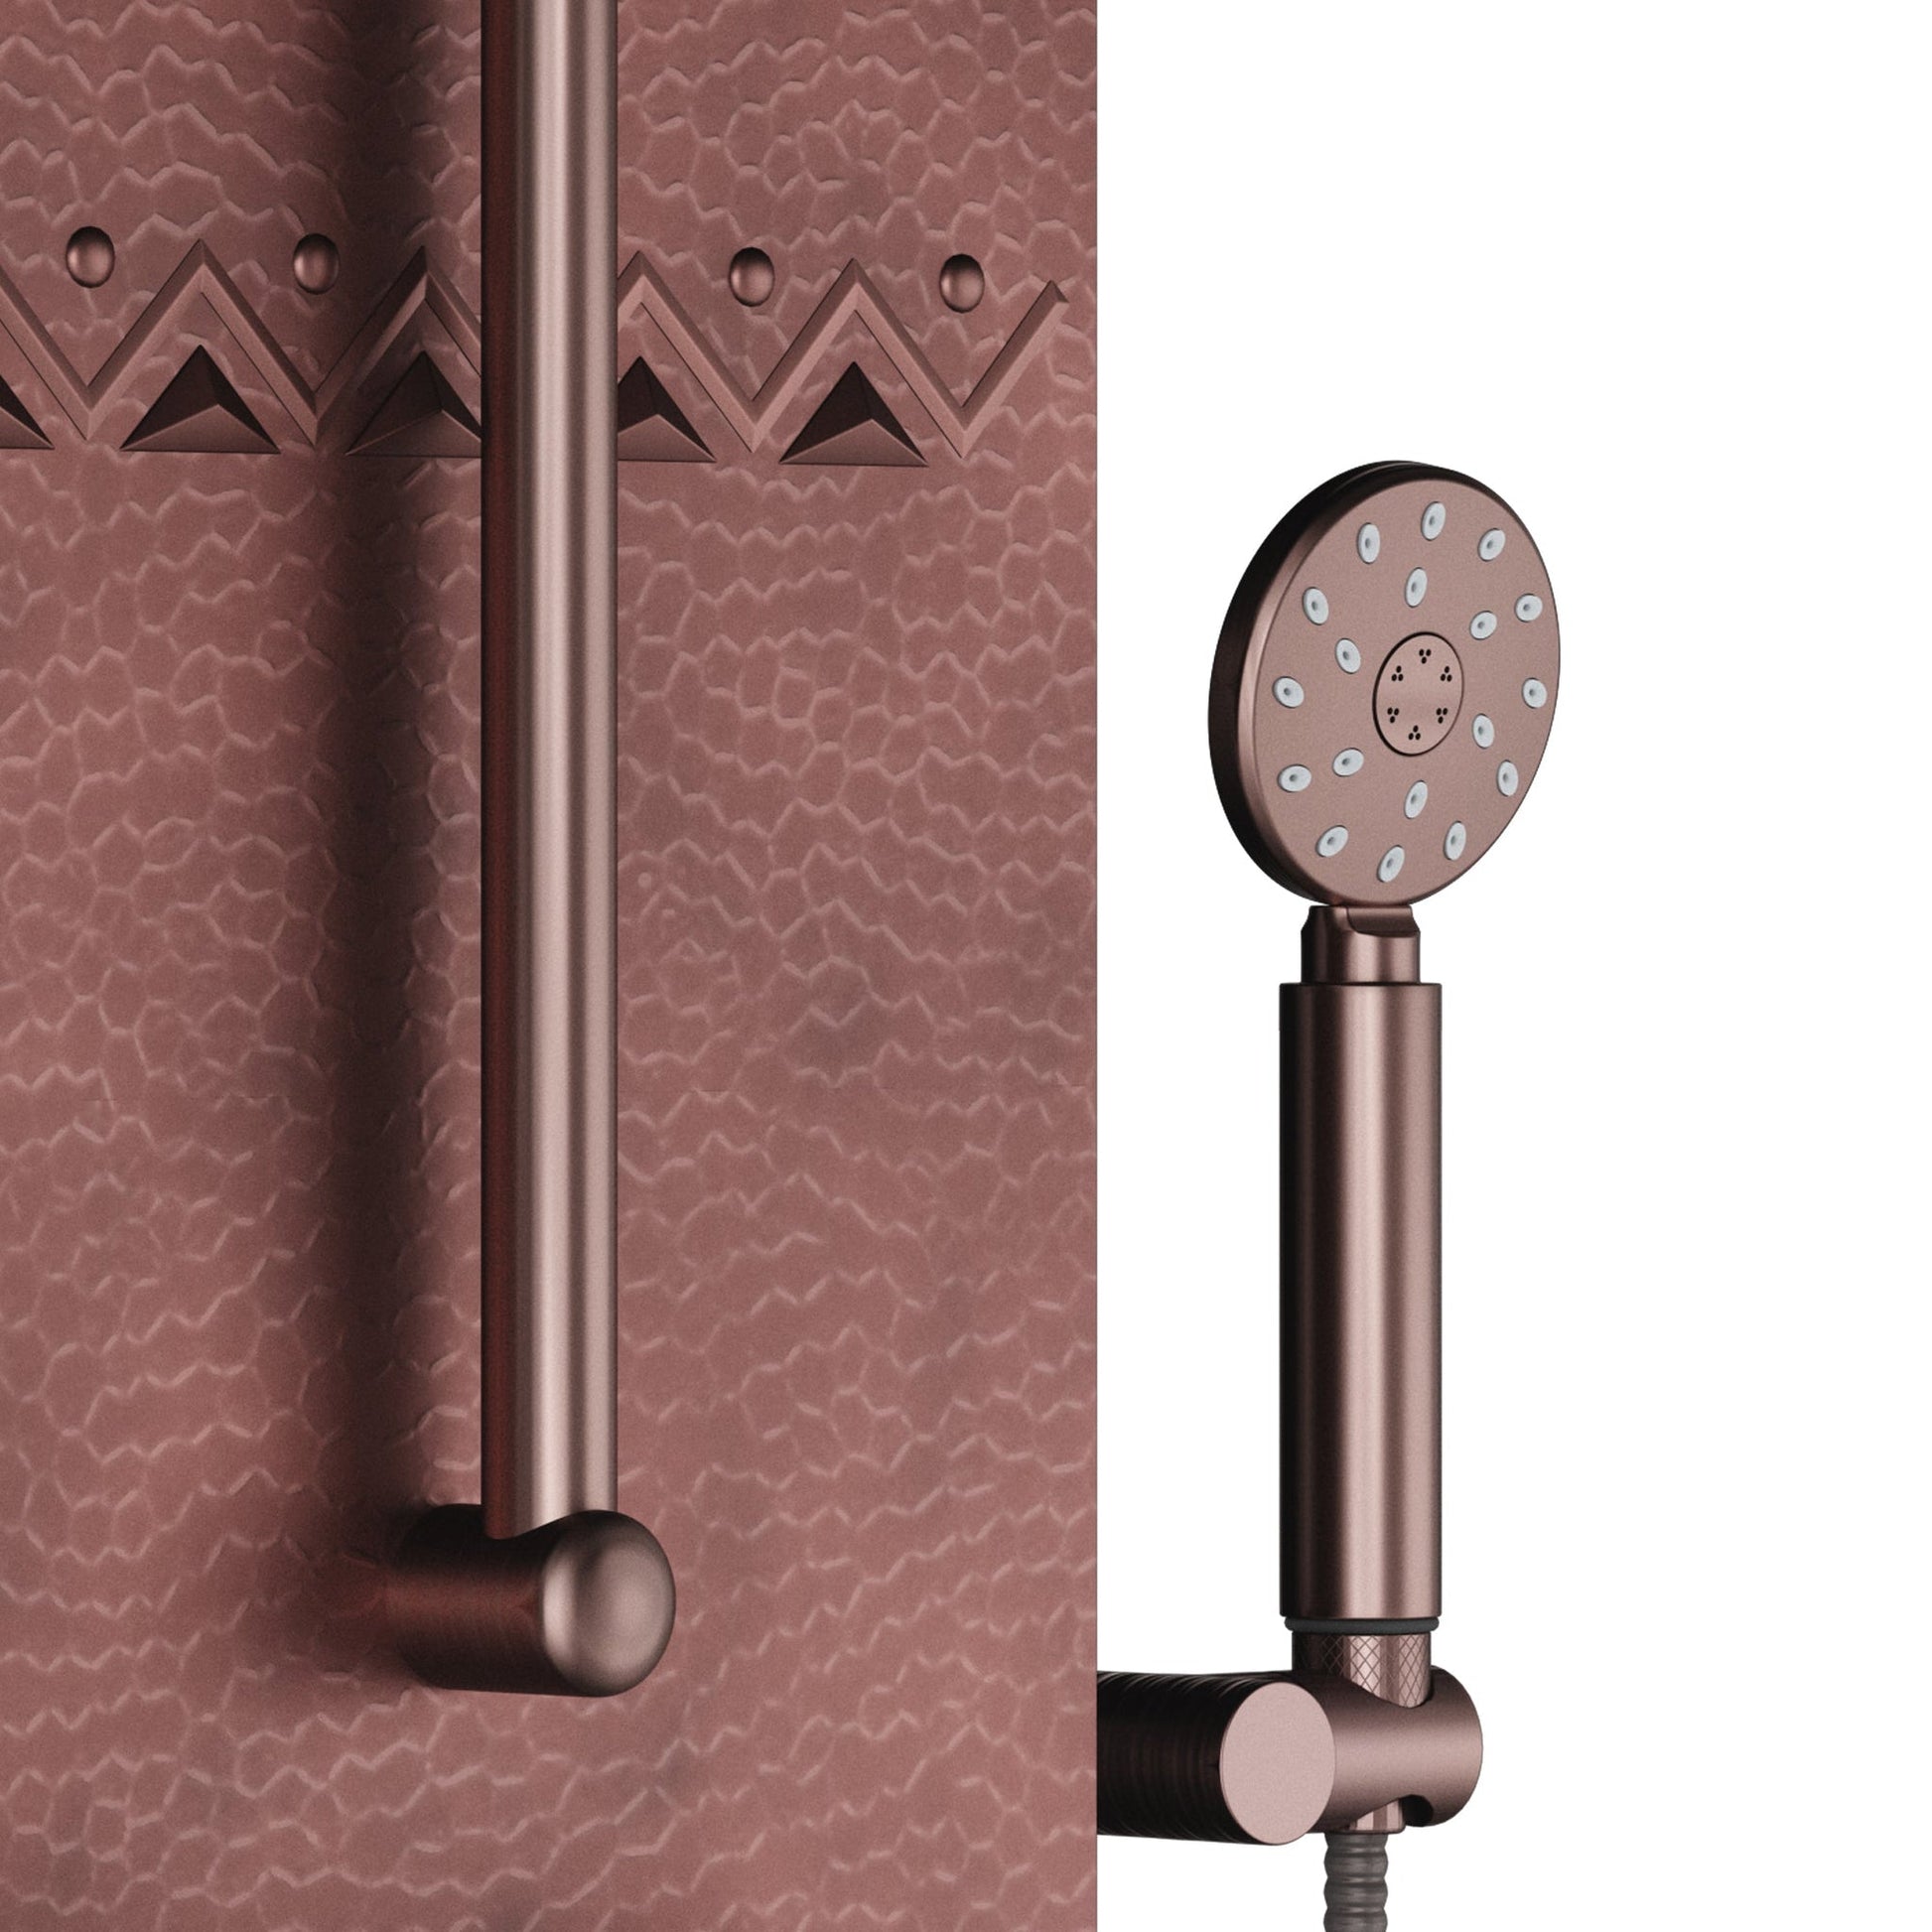 PULSE ShowerSpas Navajo 55" Hammered Copper Rain Shower Panel 2.5 GPM in Oil Rubbed Bronze Finish With 4 Multi Function Body Jets and Hand Shower